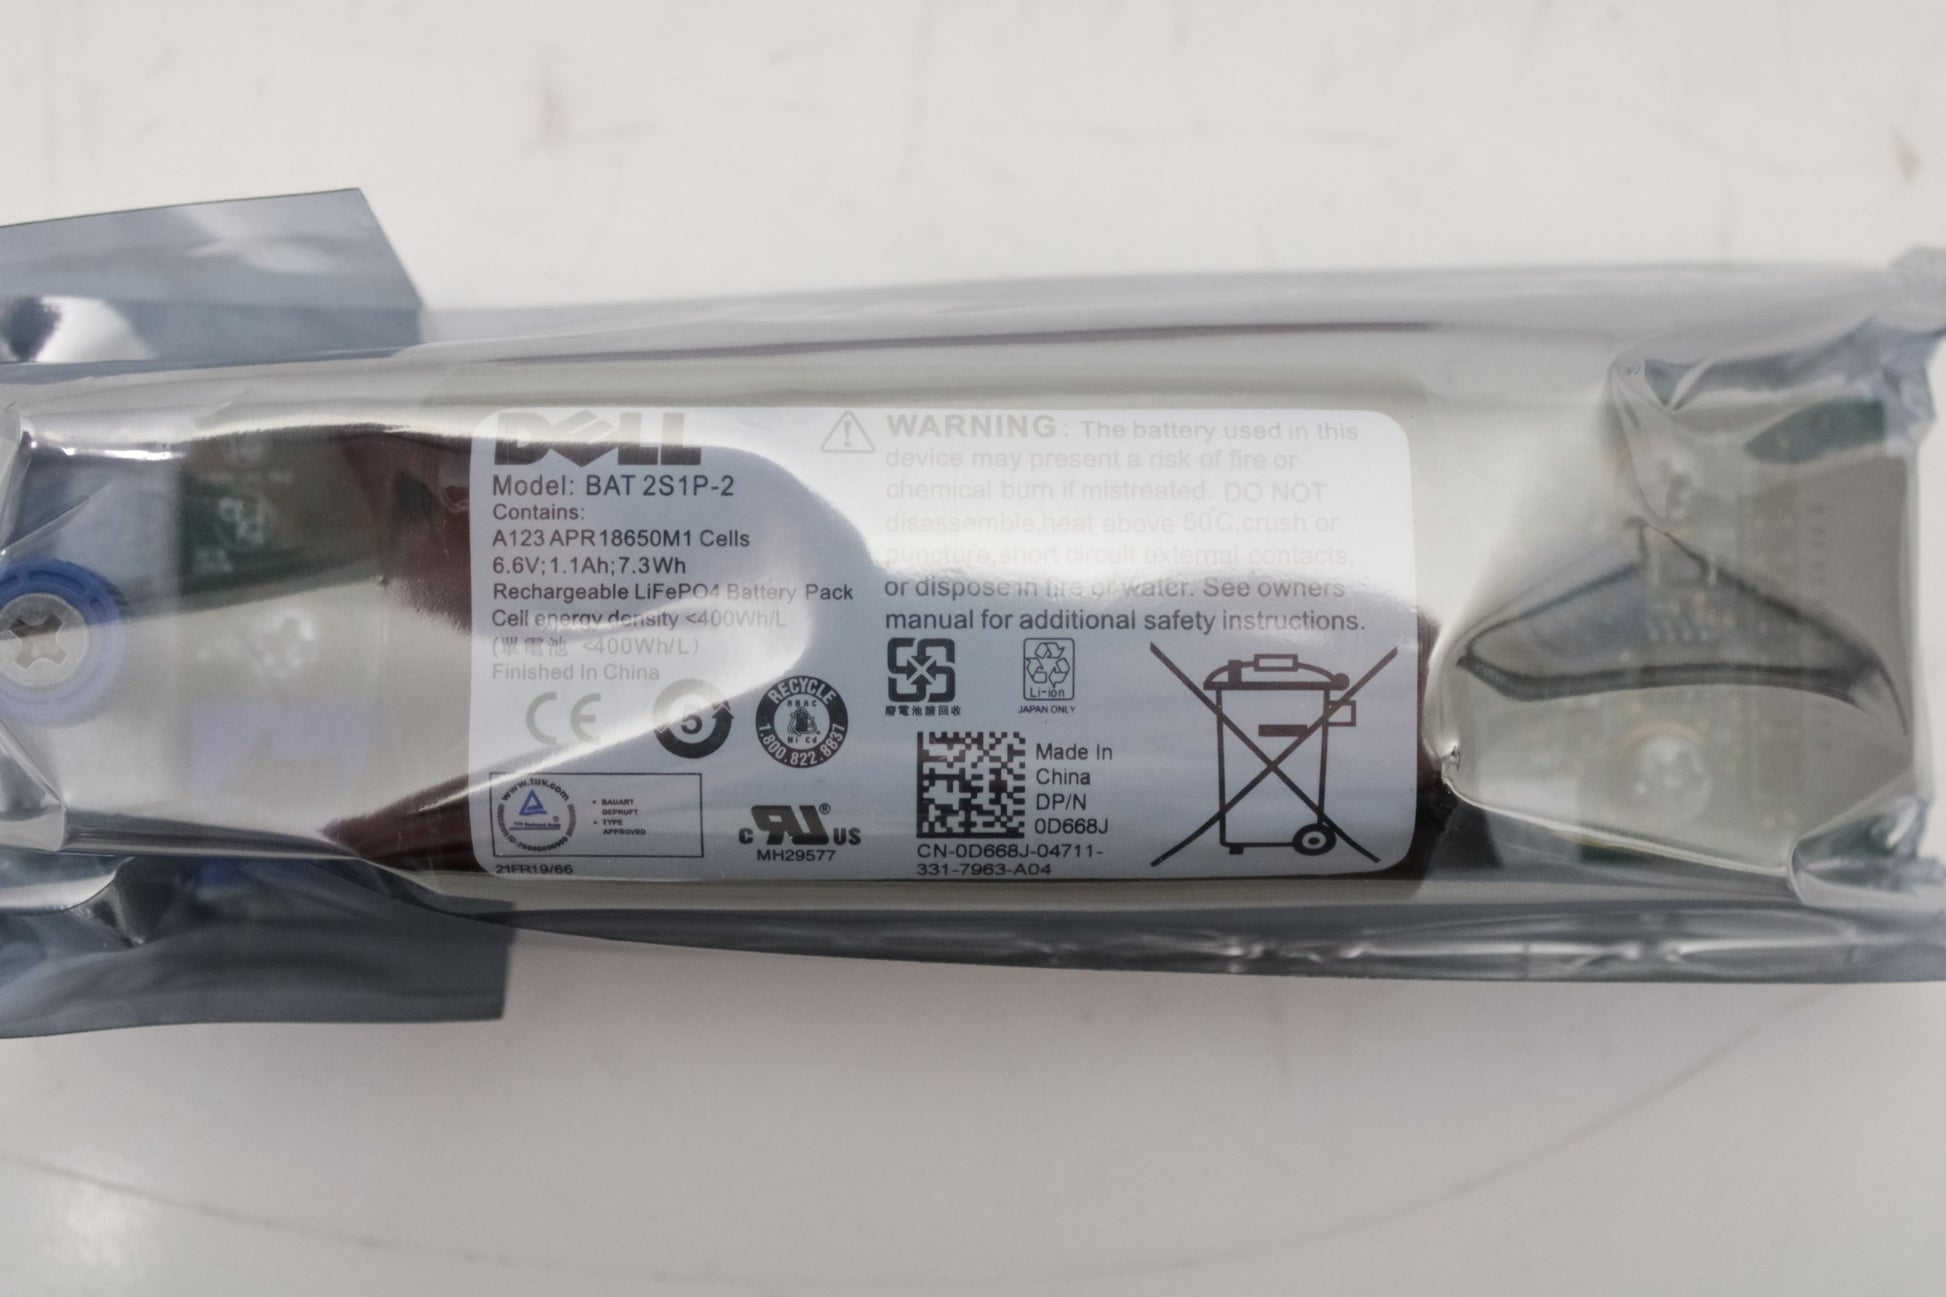 Dell D668J_NEW PowerVault RAID Controller Battery for MD3200i, MD3220i, MD3600, New Sealed